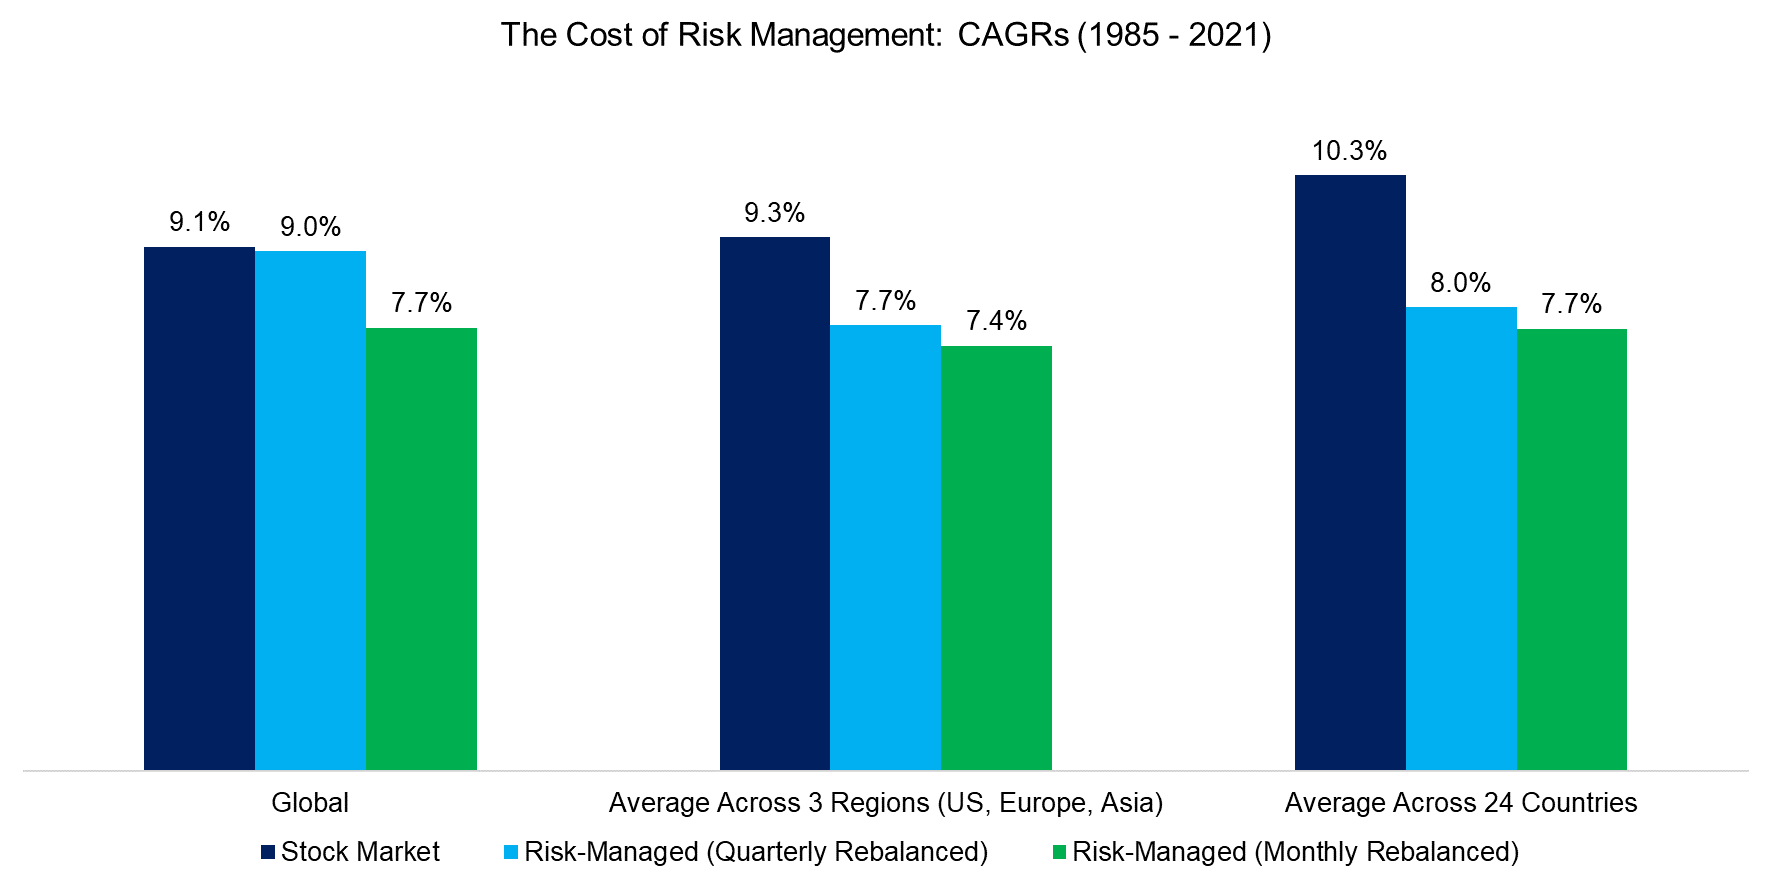 The Cost of Risk Management CAGRs (1985 - 2021)